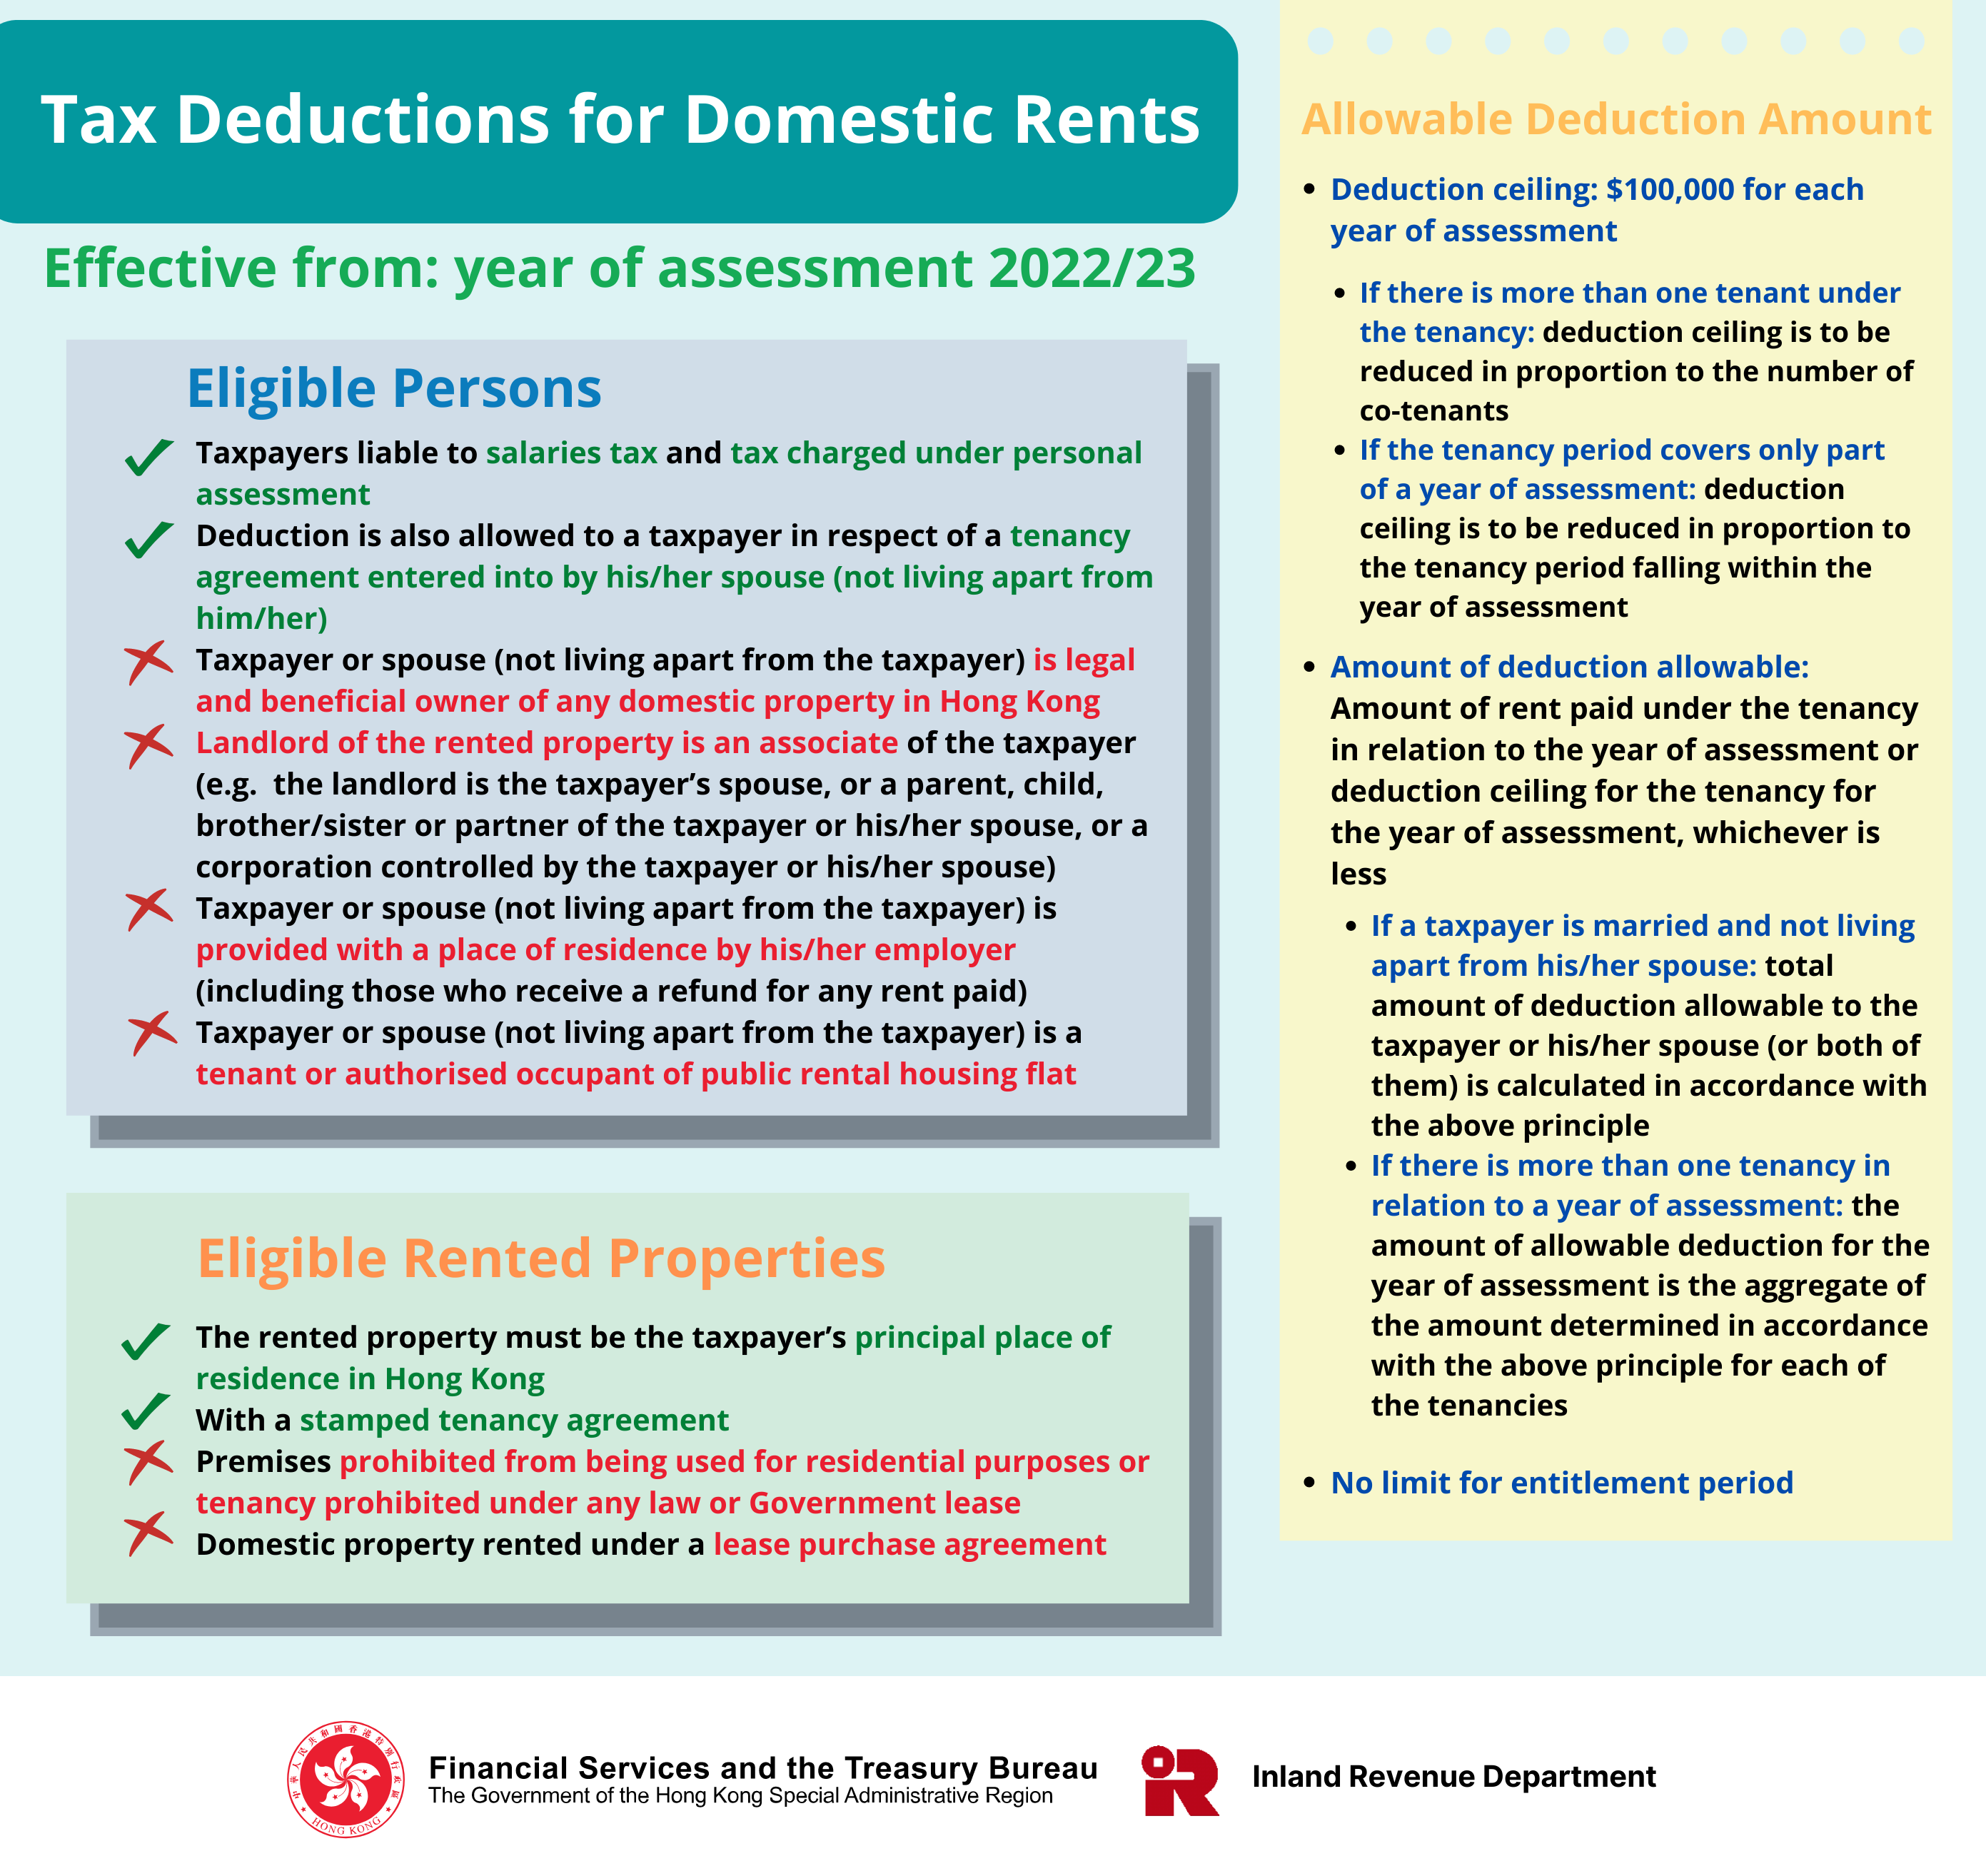 ird-tax-deduction-for-domestic-rent